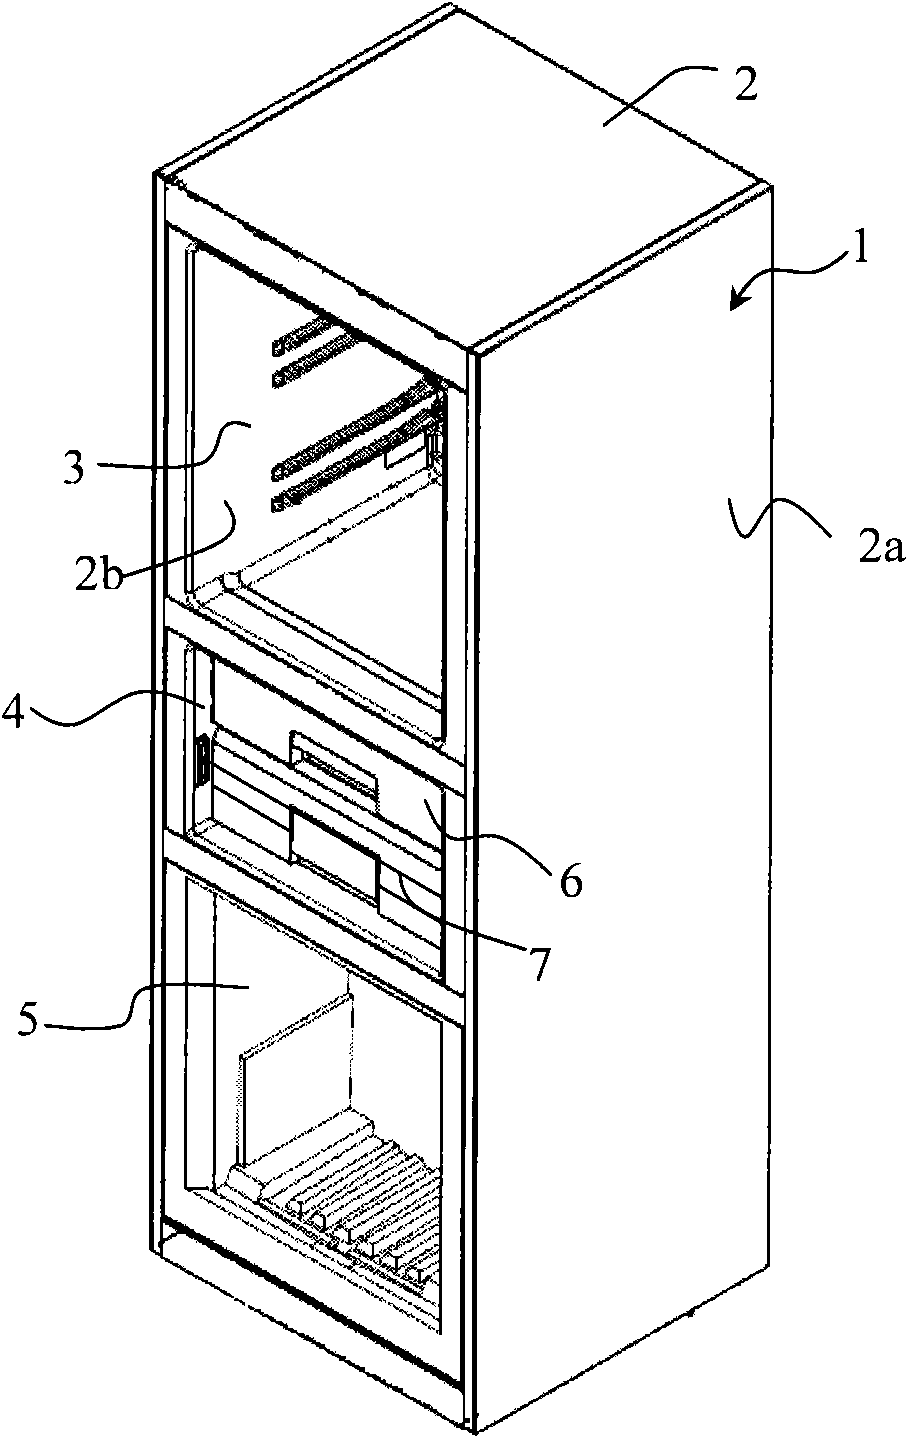 Storage unit and refrigeration appliance with same